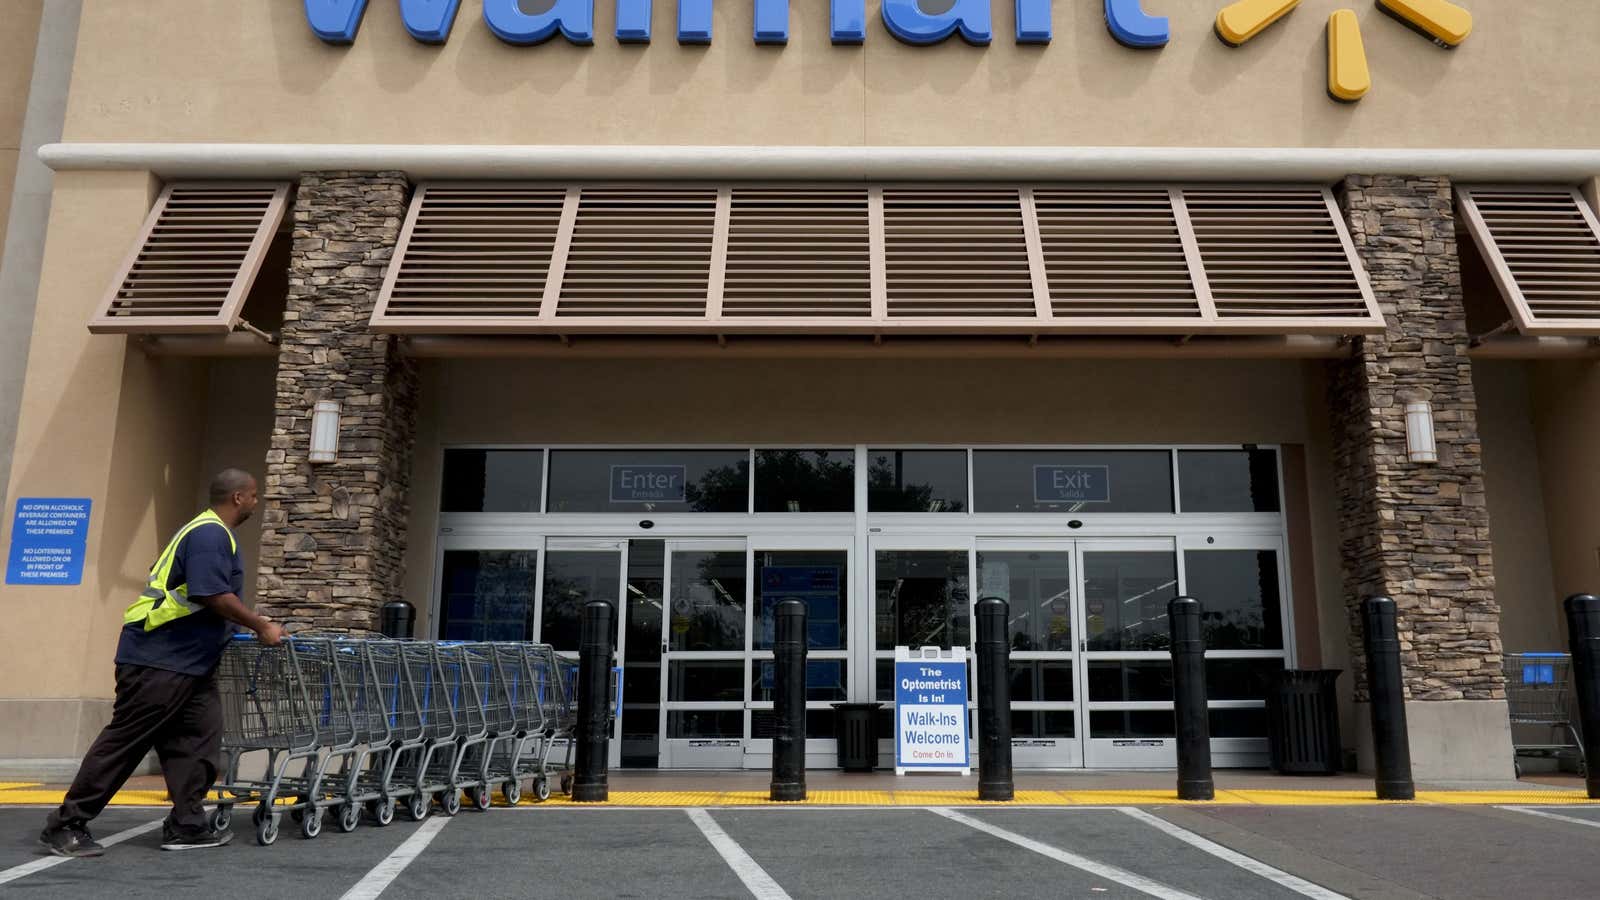 Walmart is simultaneously one of the highest paying companies in the US and a low-wage employer.